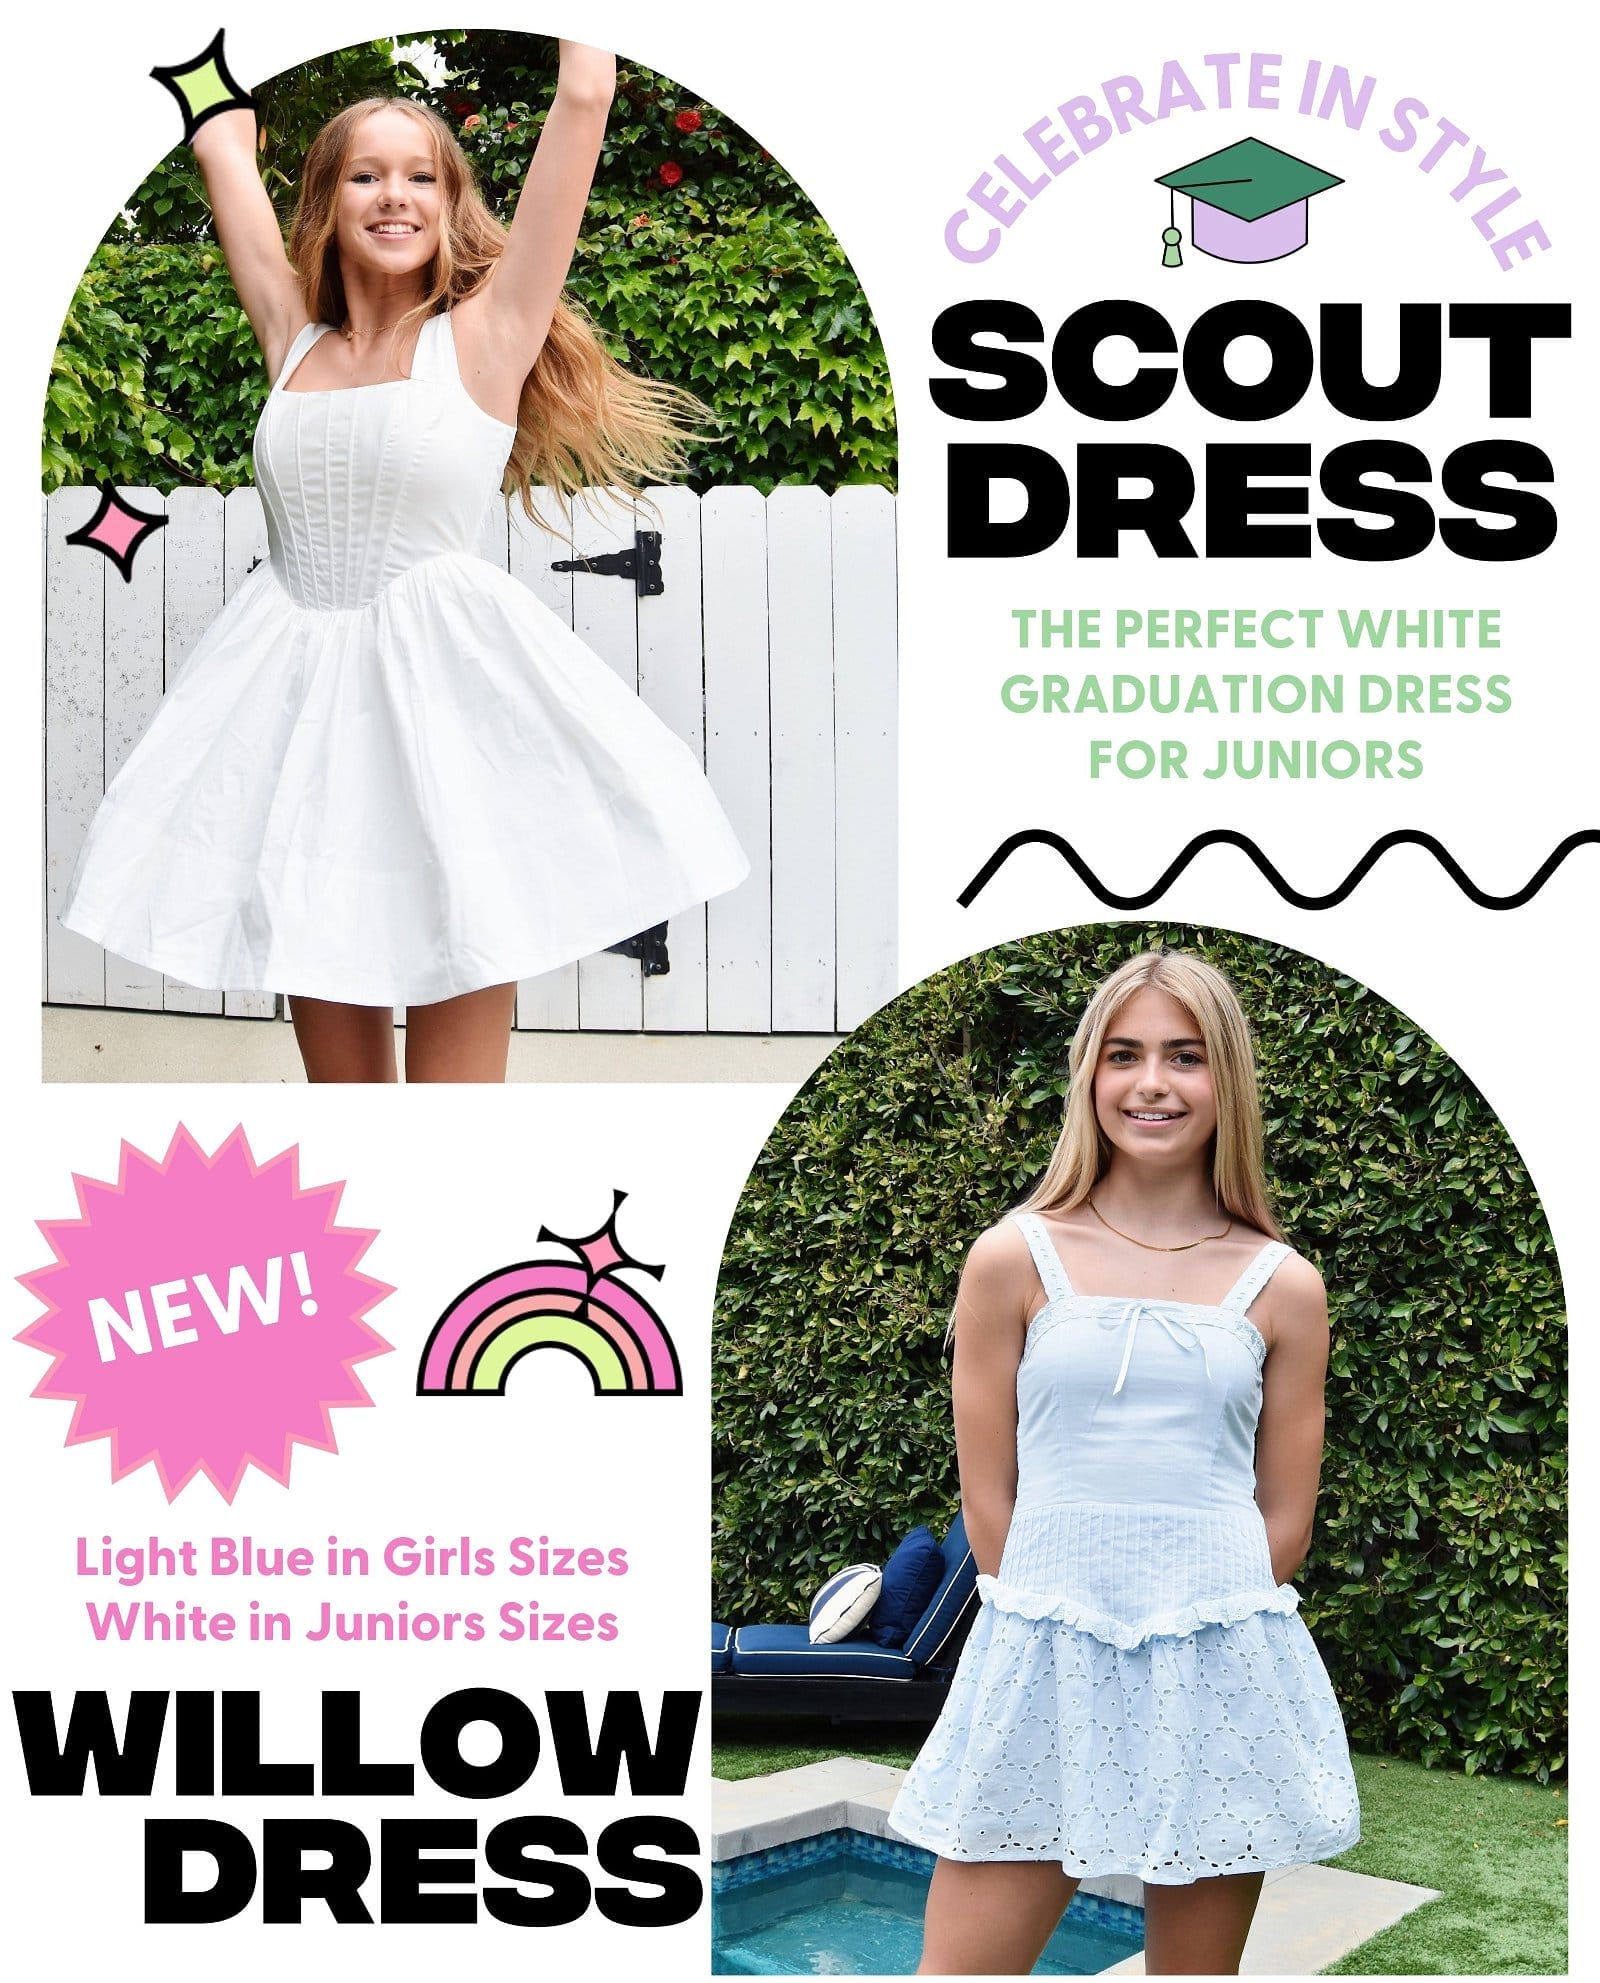 Celebrate in Style Scout Dress The Perfect White Graduation Dress for Juniors. New! Willow Dress - Light Blue in Girls Sizes White in Juniors Sizes